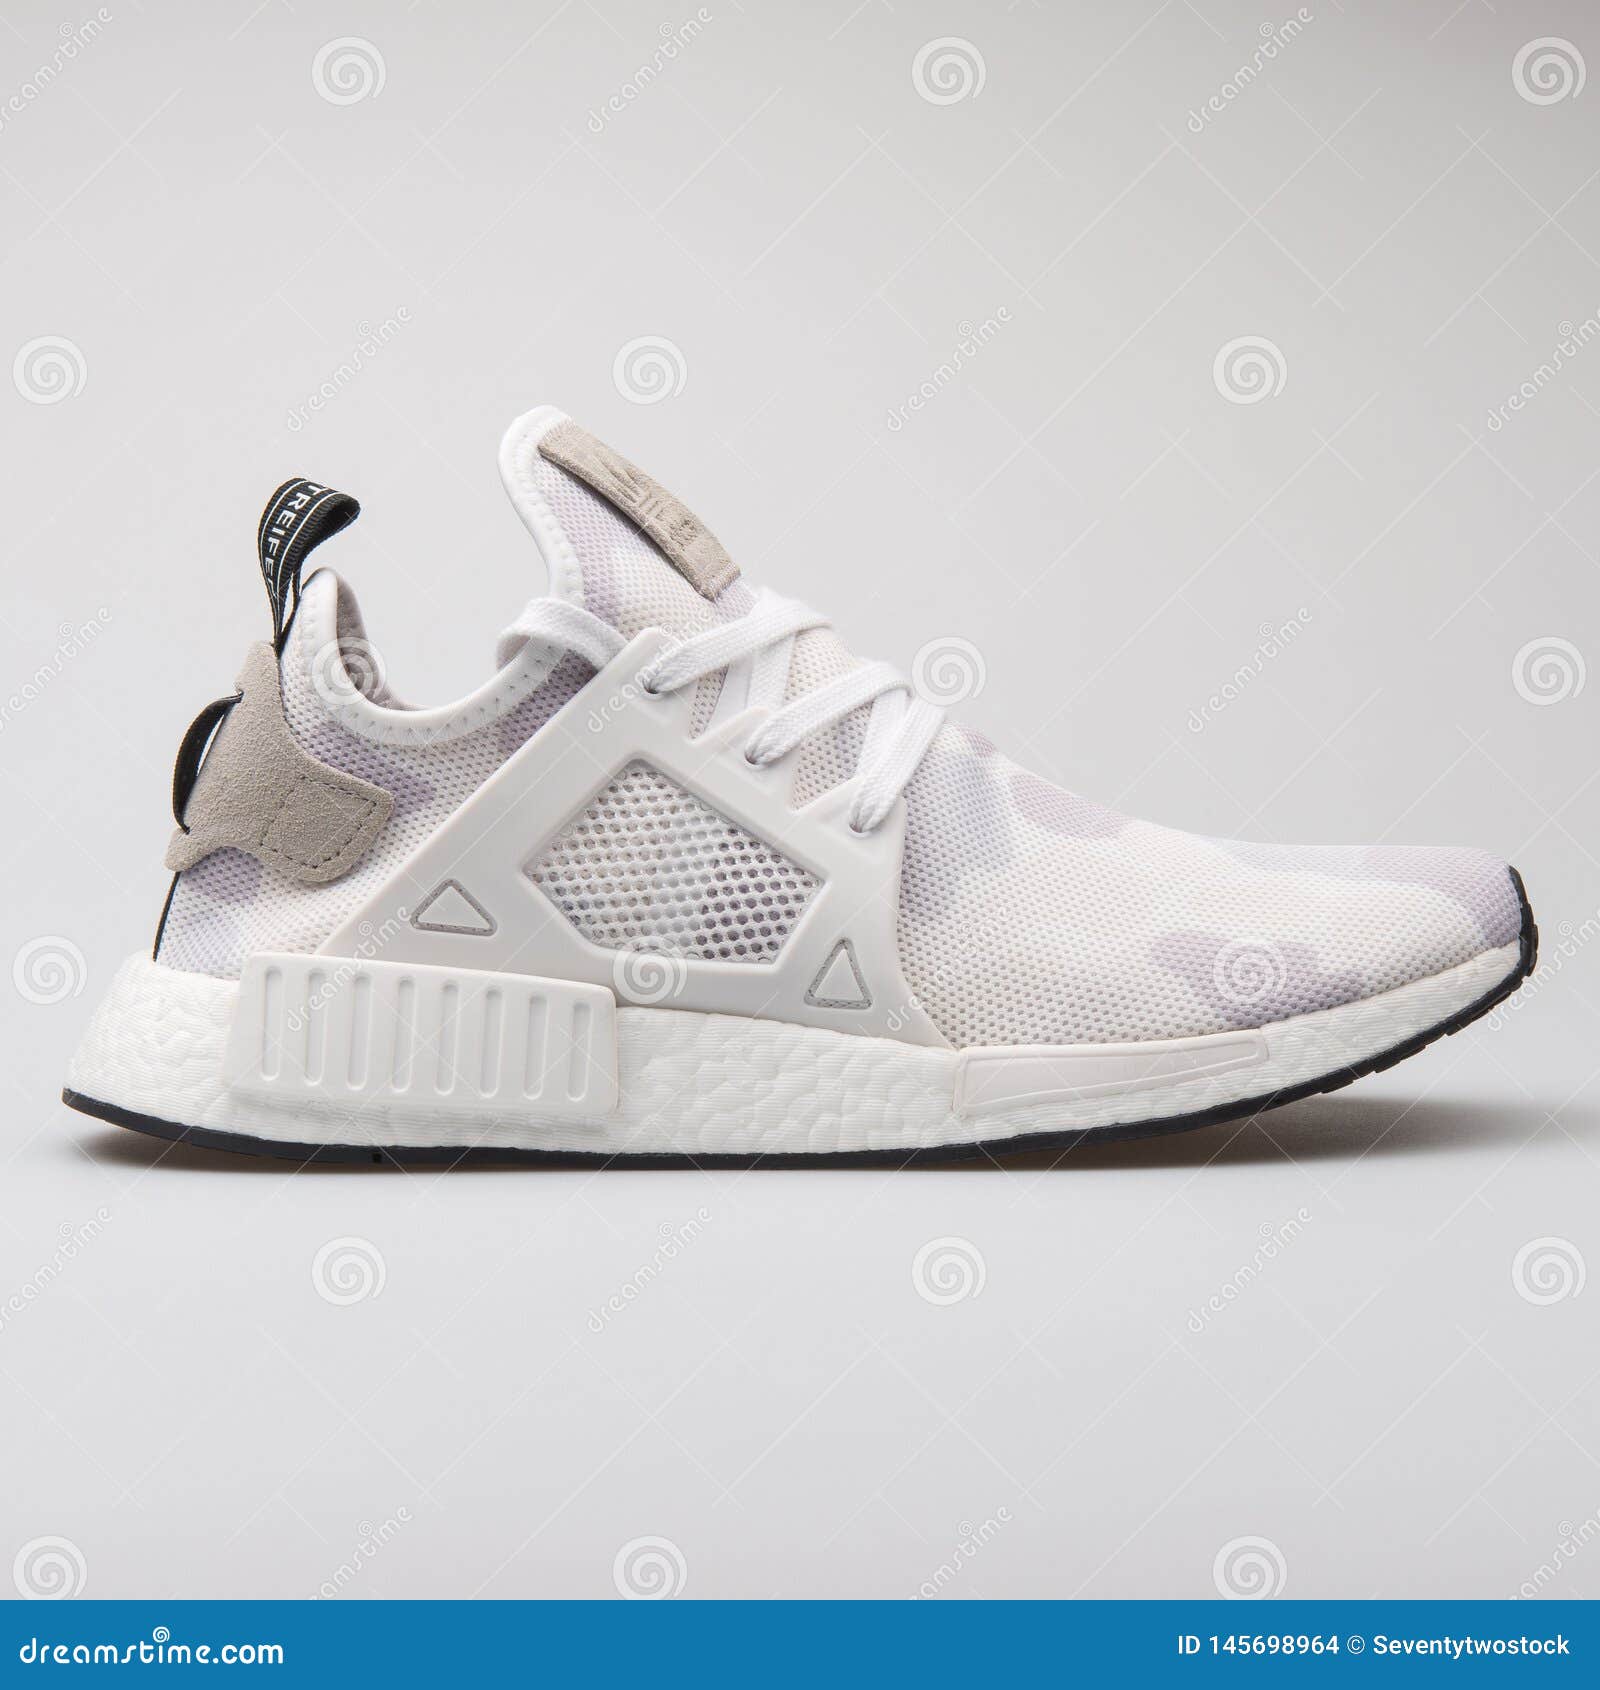 NMD XR1 Duck Camo Sneaker Editorial Image - of athletic, background: 145698964